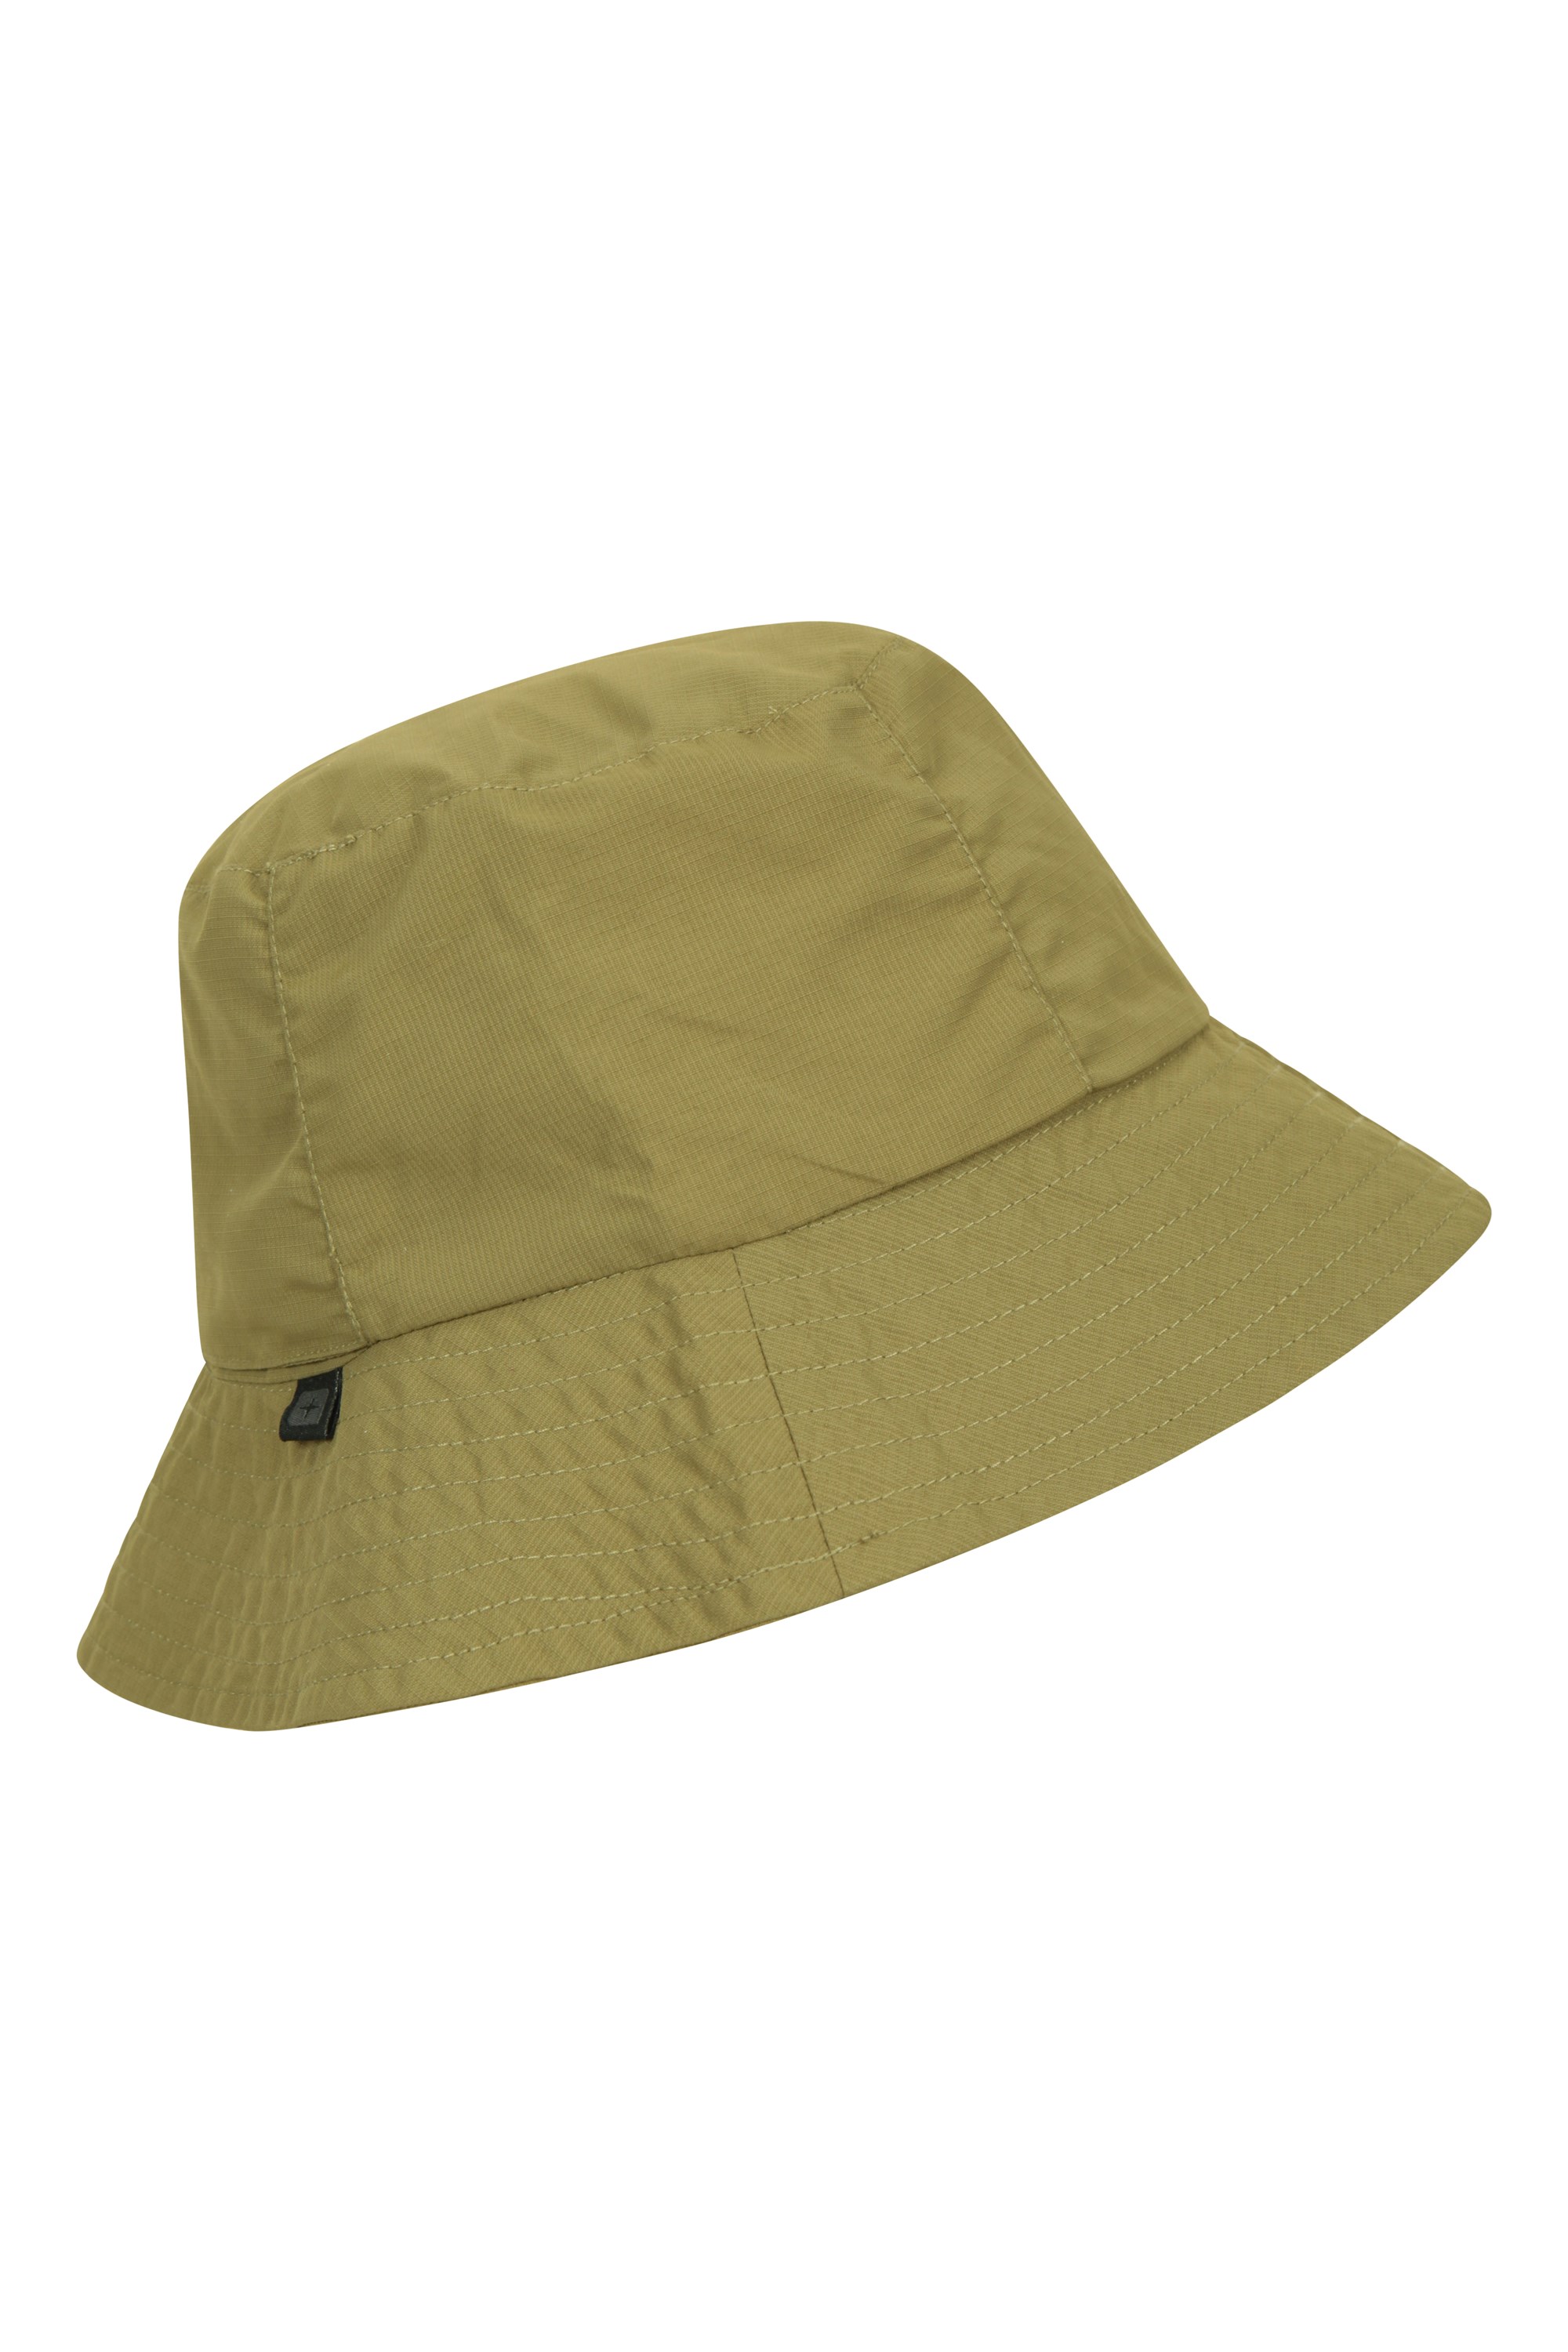 Mountain Warehouse Mens Packable Bucket Hat - Green | Size One